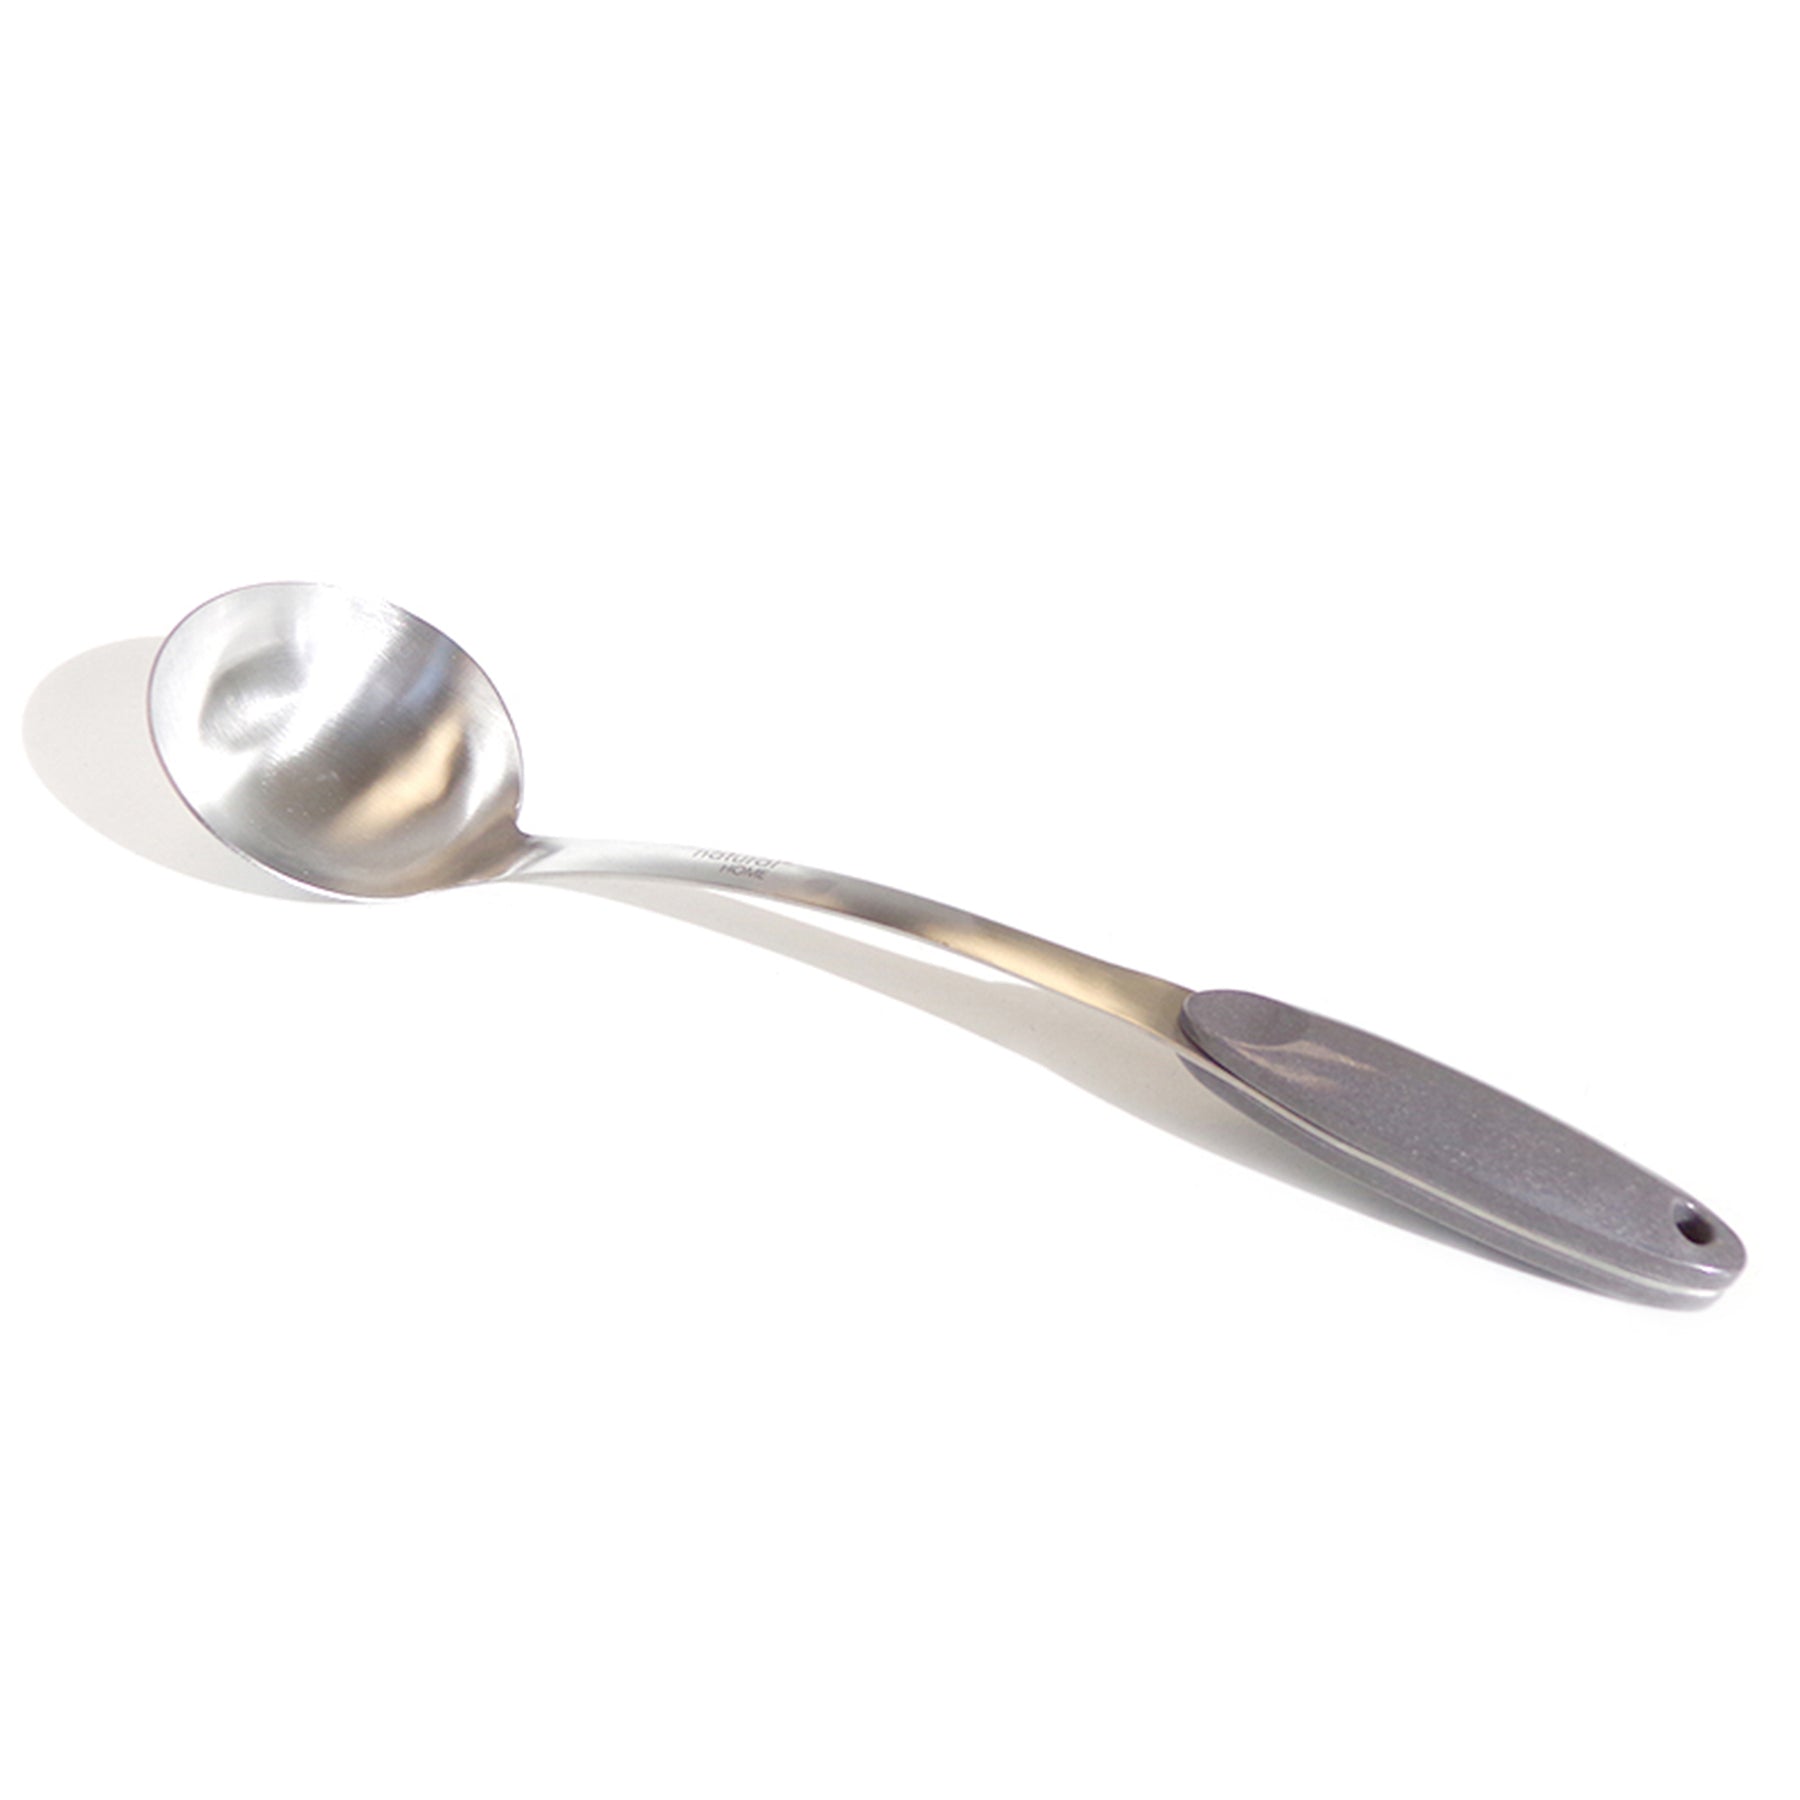 Molded Bamboo® and Stainless Steel Ladle